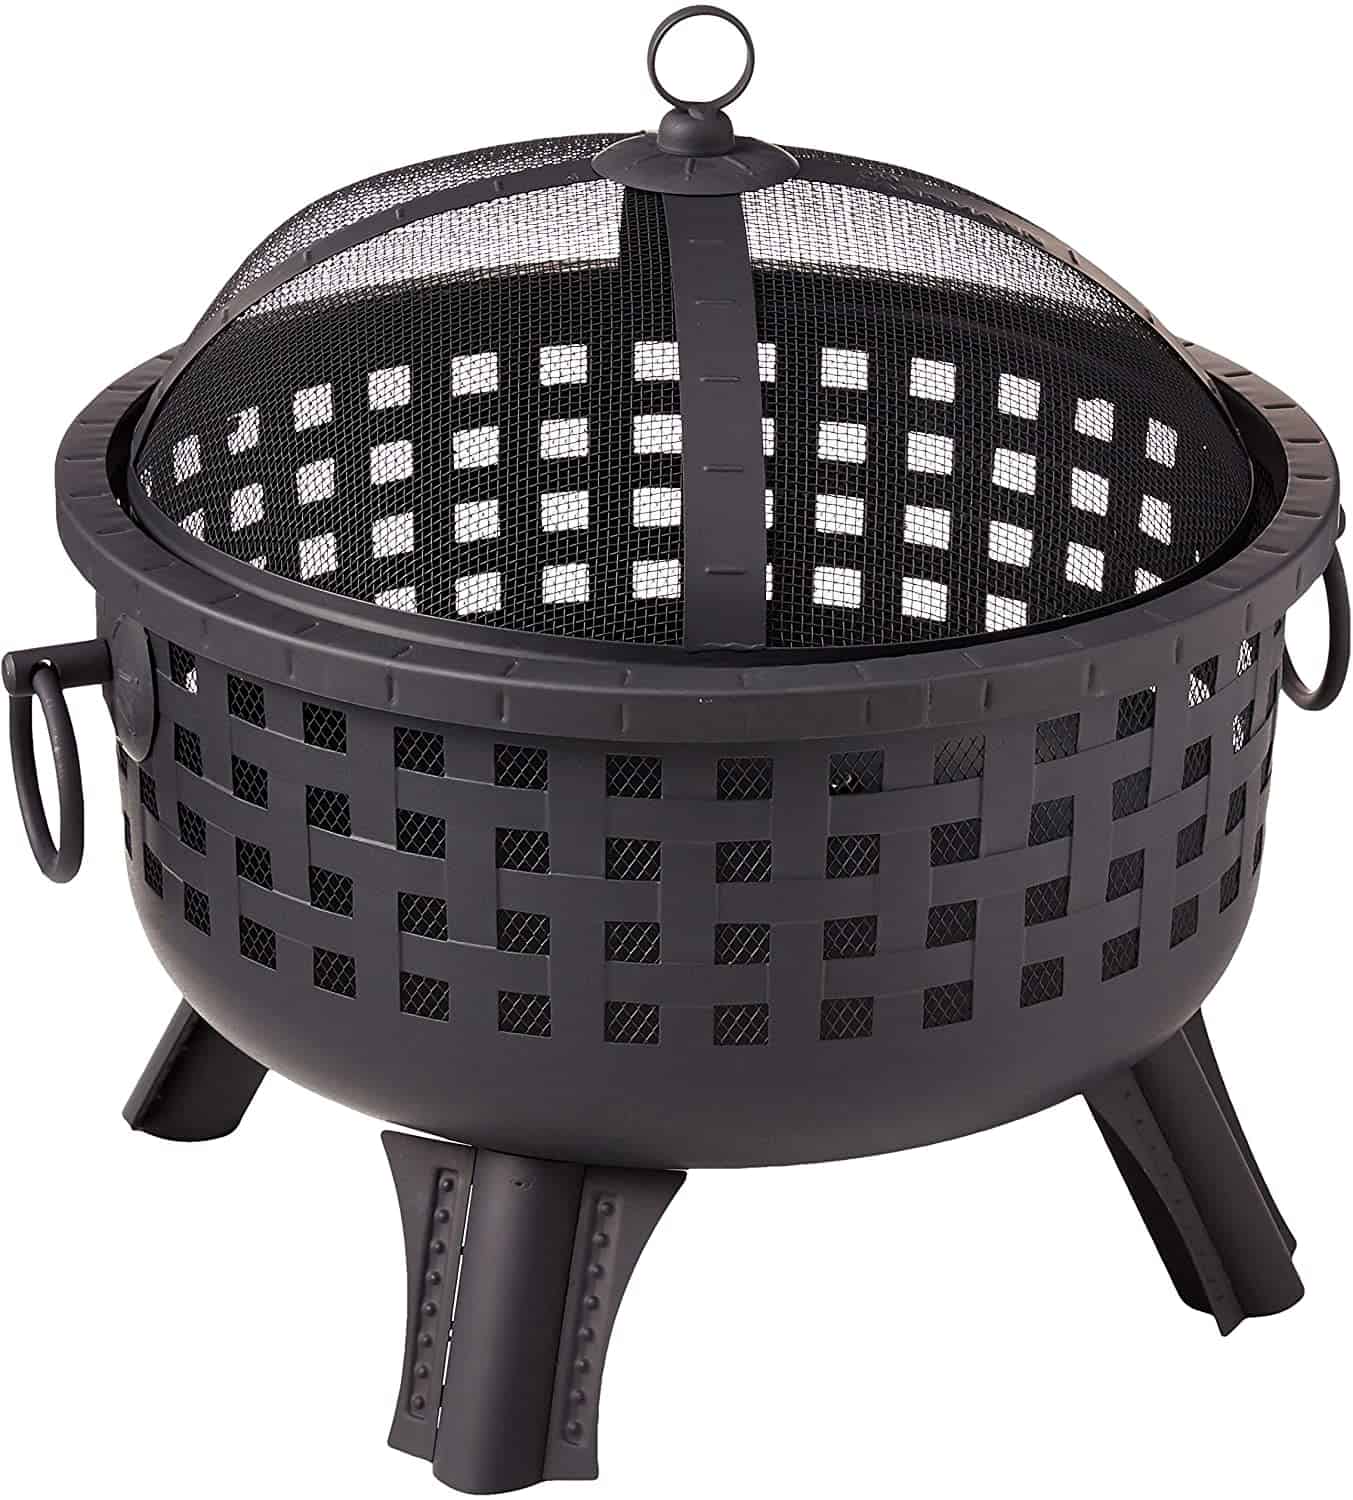 7 Best Fire Pits for Outdoor Heat: Reviews & Buying Guide